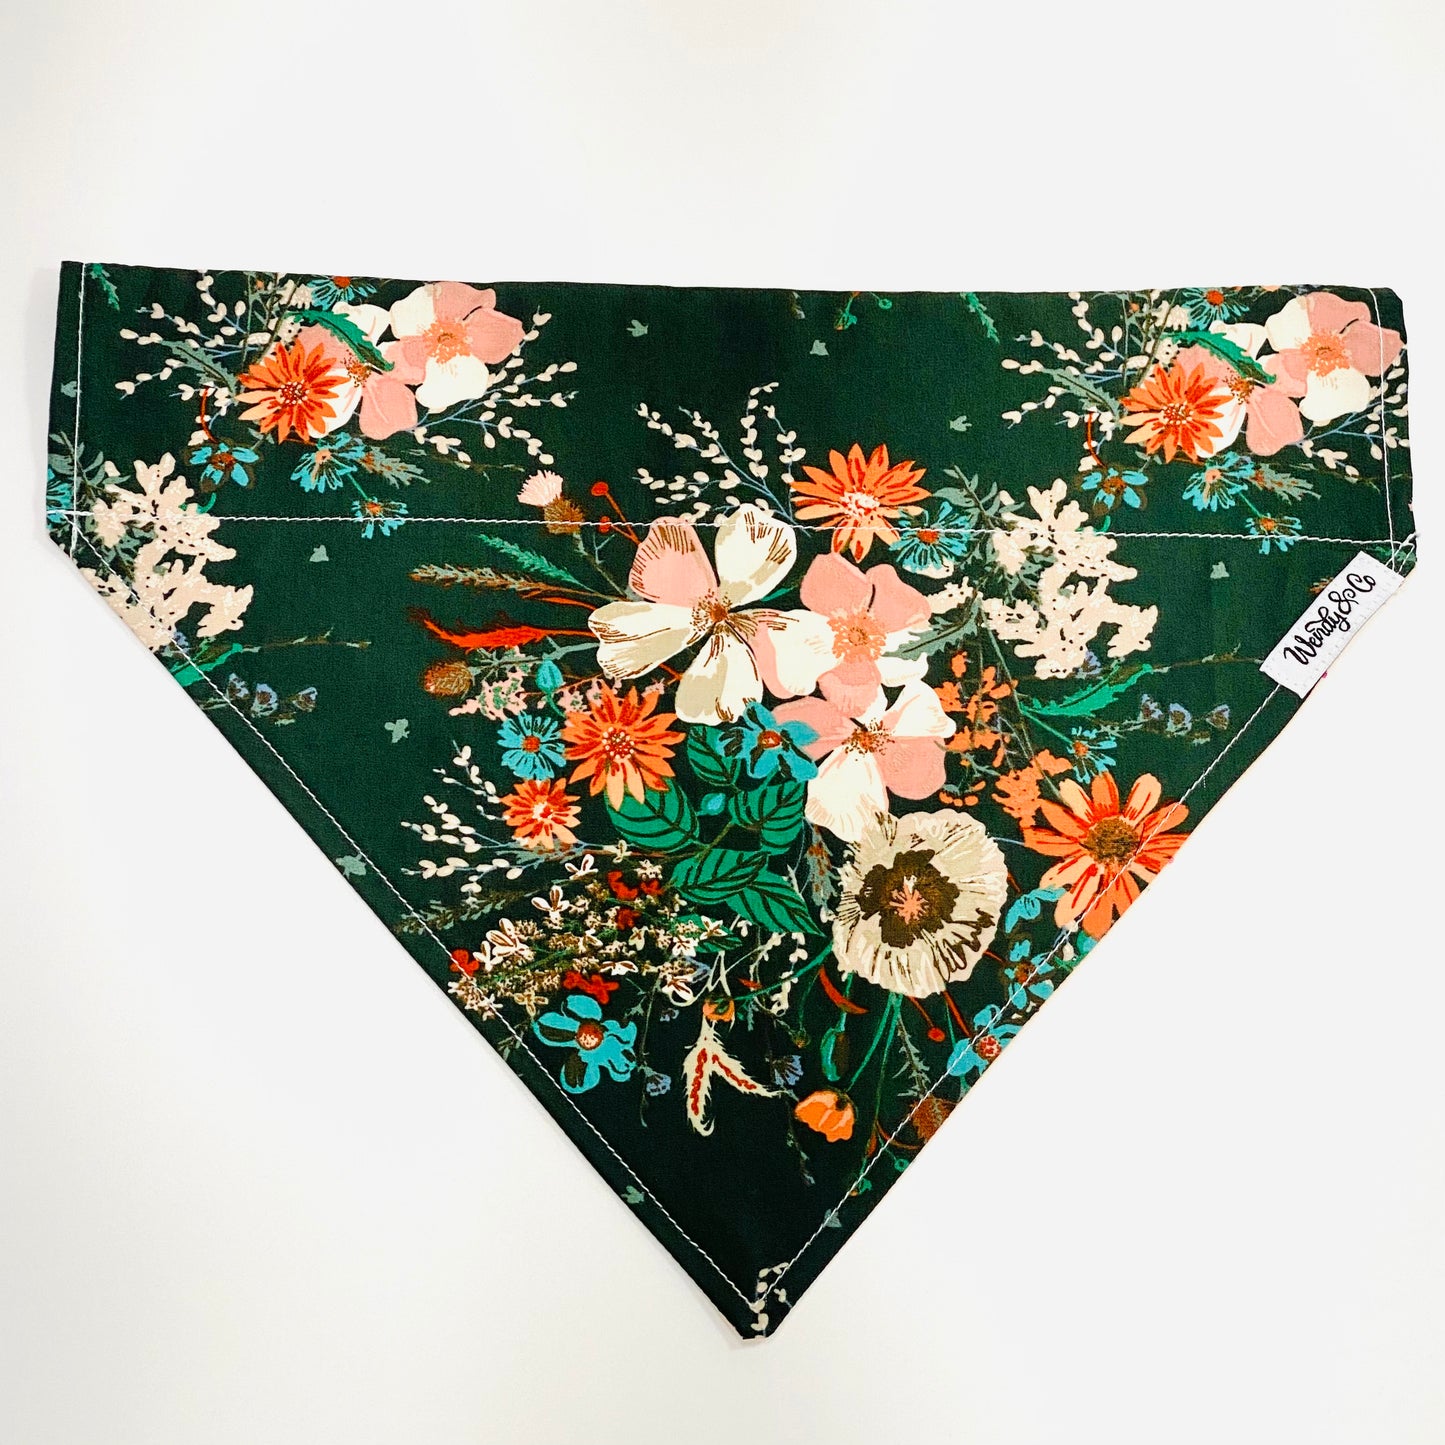 Gorgeous reversible dog bandana with emerald green background and a bouquet of blush flowers.